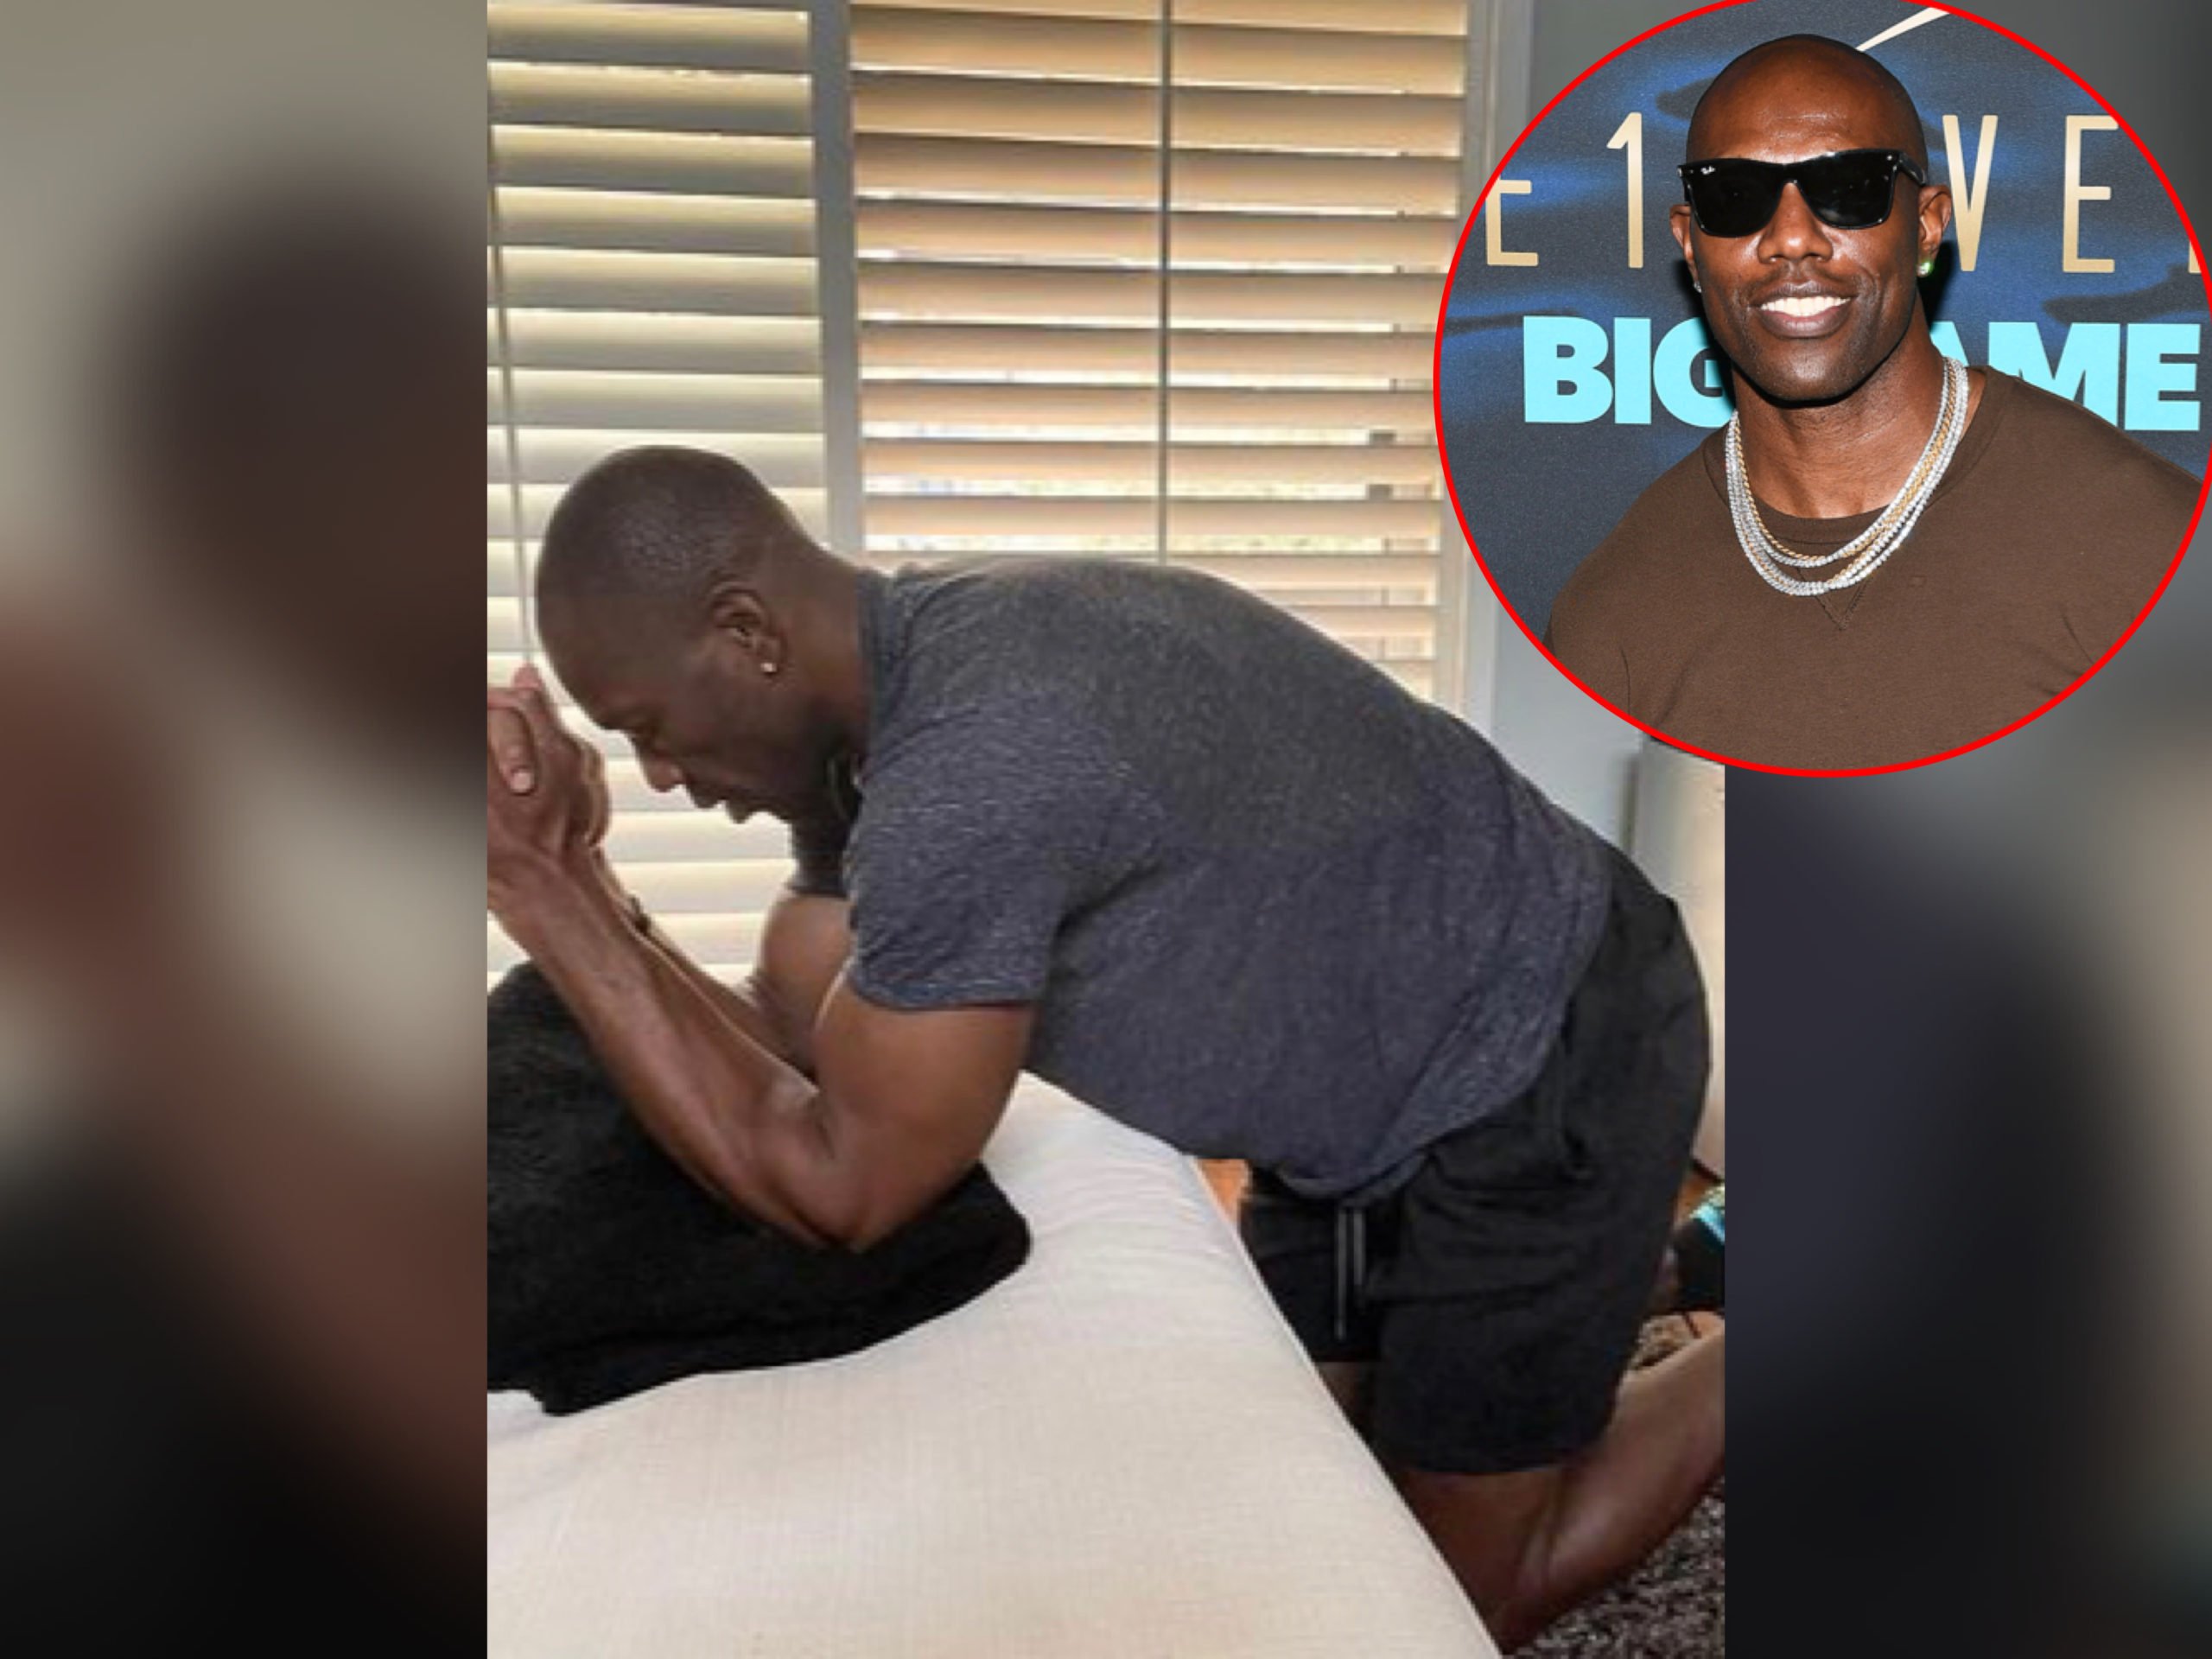 Terrell Owens Shares That He Was Involved In A Serious Car Accident & Walked Away With No Injuries 